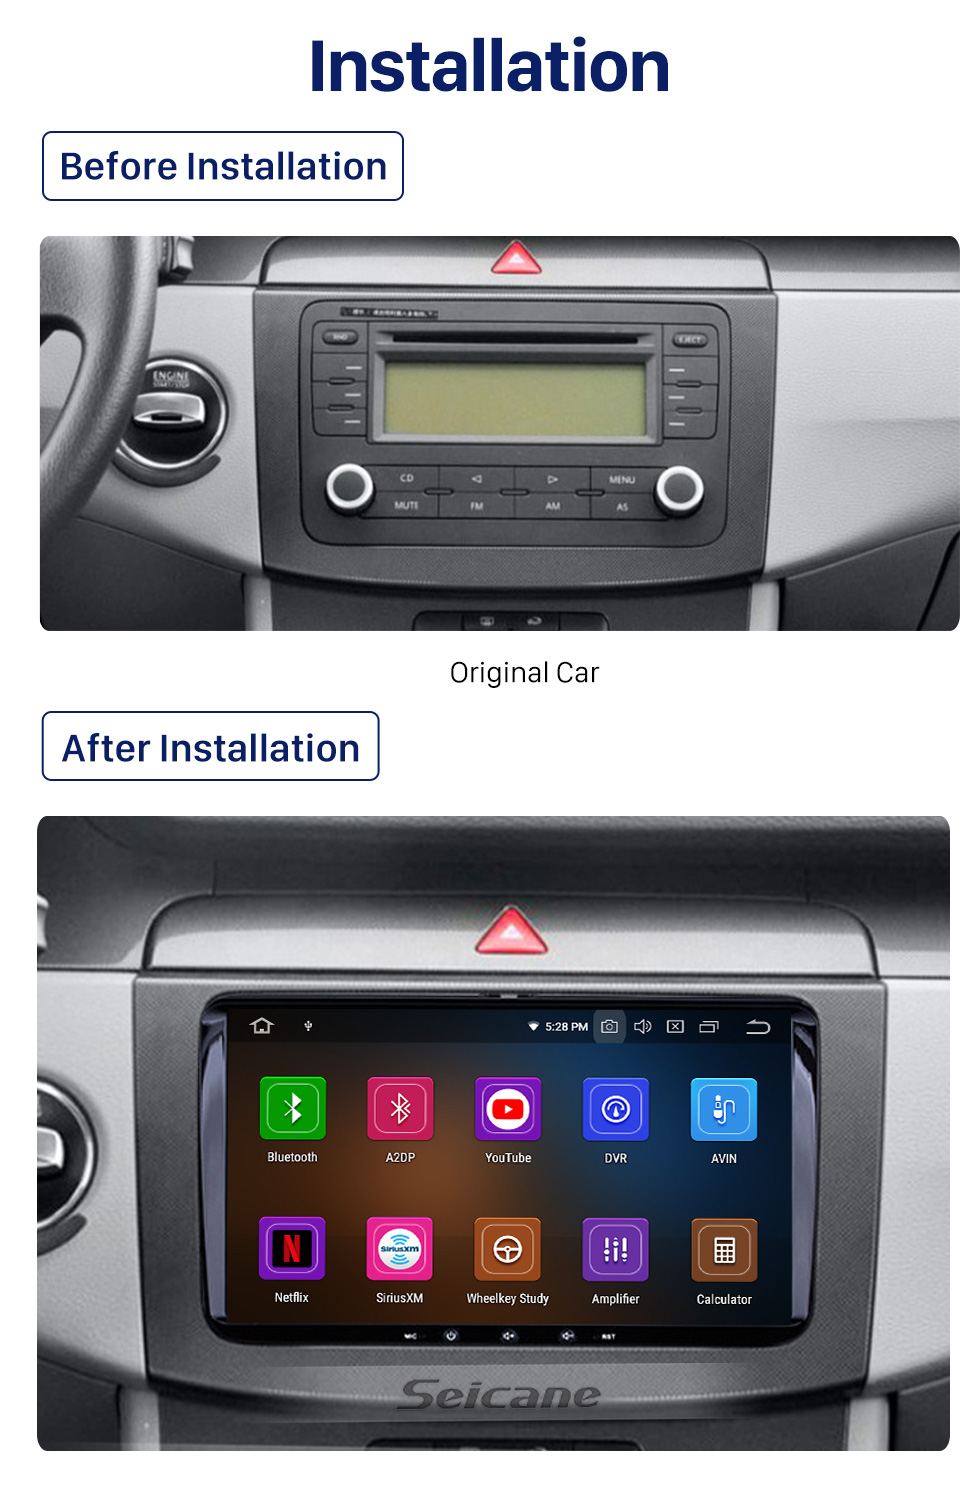 Seicane VW Volkswagen Universal SKODA Seat Android 10.0 GPS Navigation Car DVD Player with  1080P Video Player OBD2 DVR HD touch Screen Steering wheel control Bluetooth